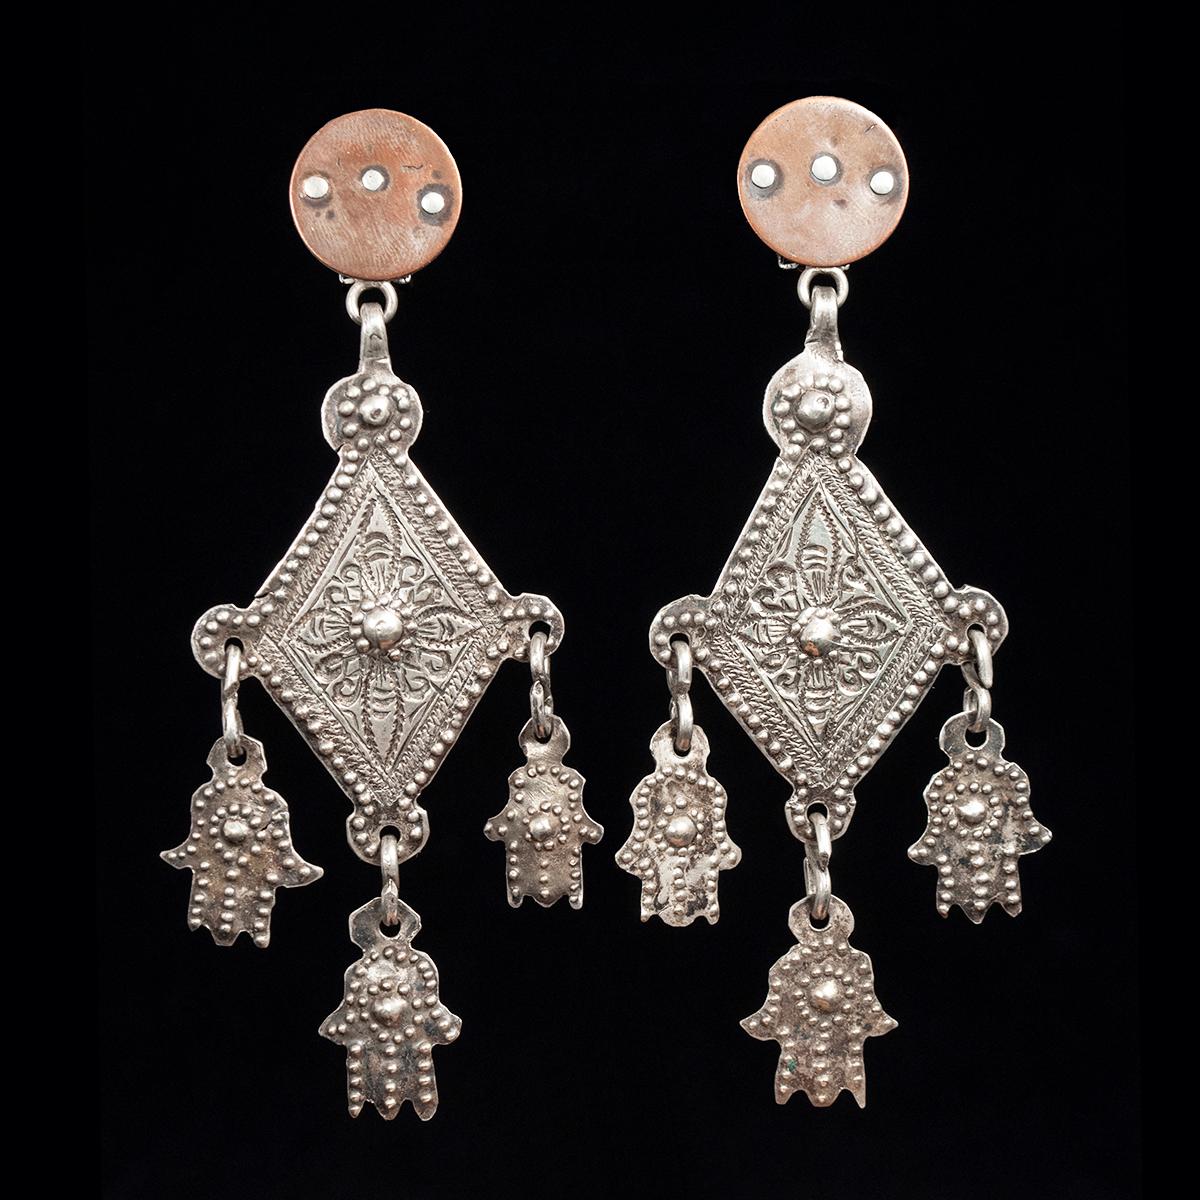 Hand-Crafted Mid-20th Century Silver Khamsa and Copper Earrings by Jewels For Sale